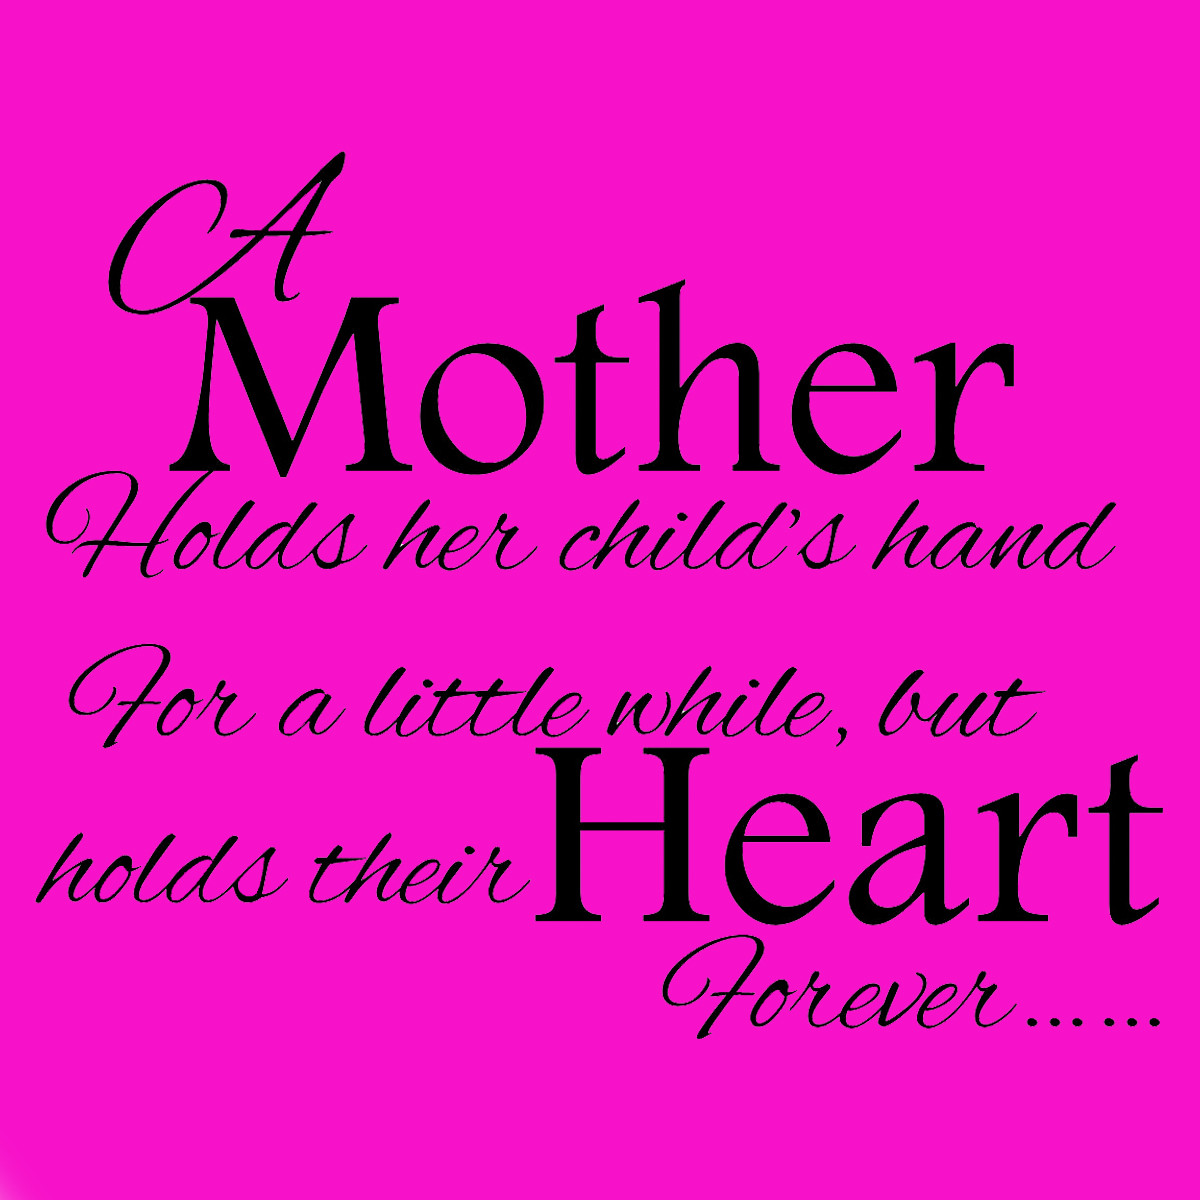 Mothers Images And Quotes
 Mothers Day Quotes For QuotesGram